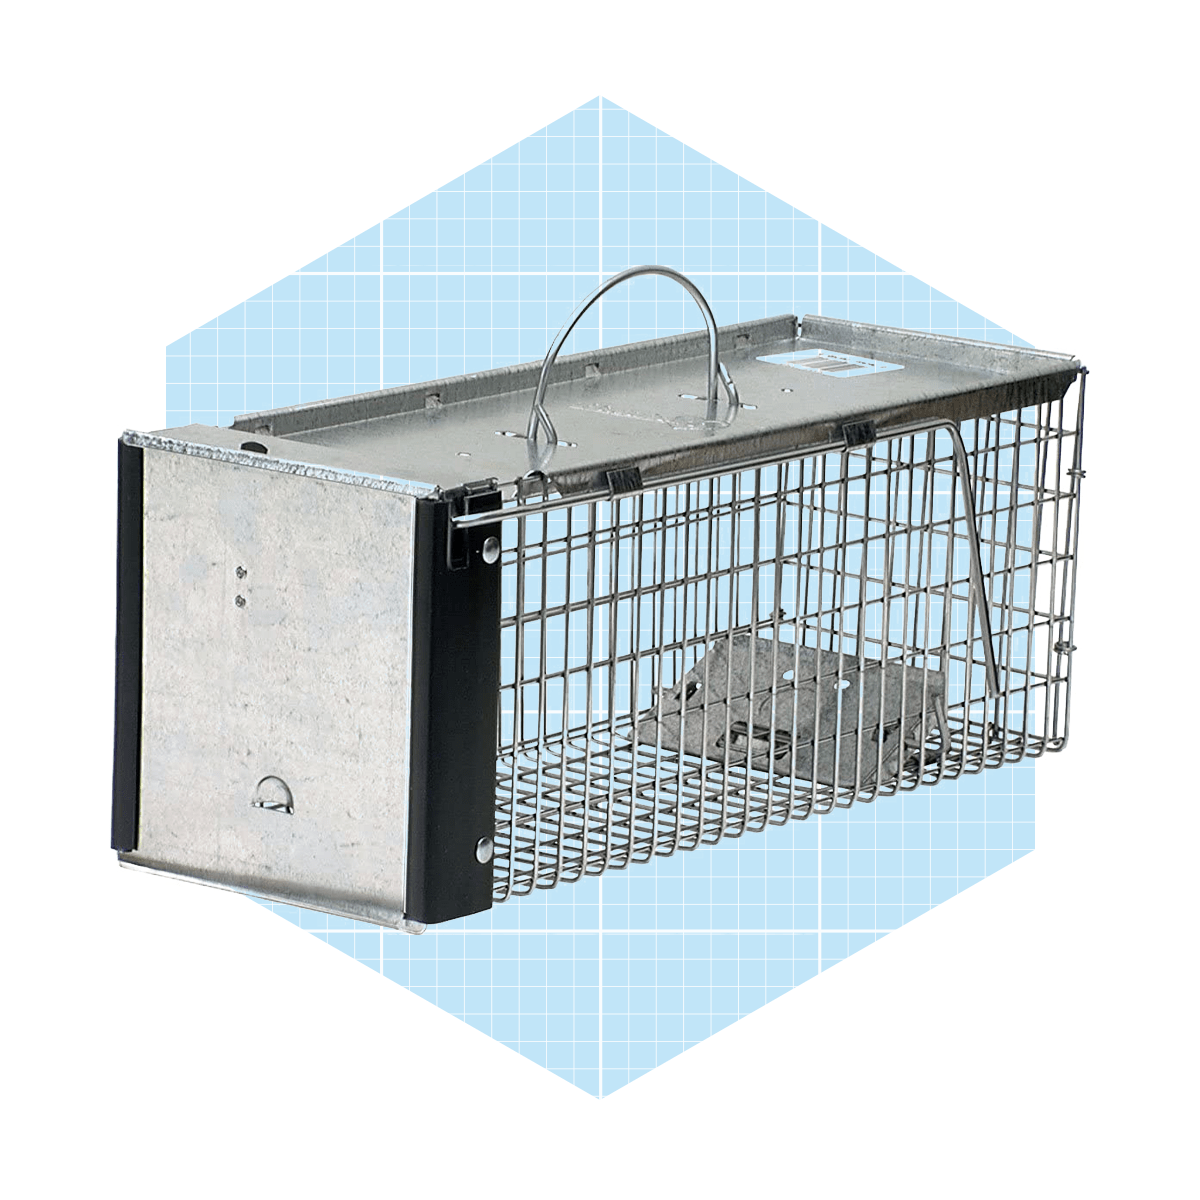 Quality Rat Trap, Humane Live Animal Mouse Cage Traps, Catch And